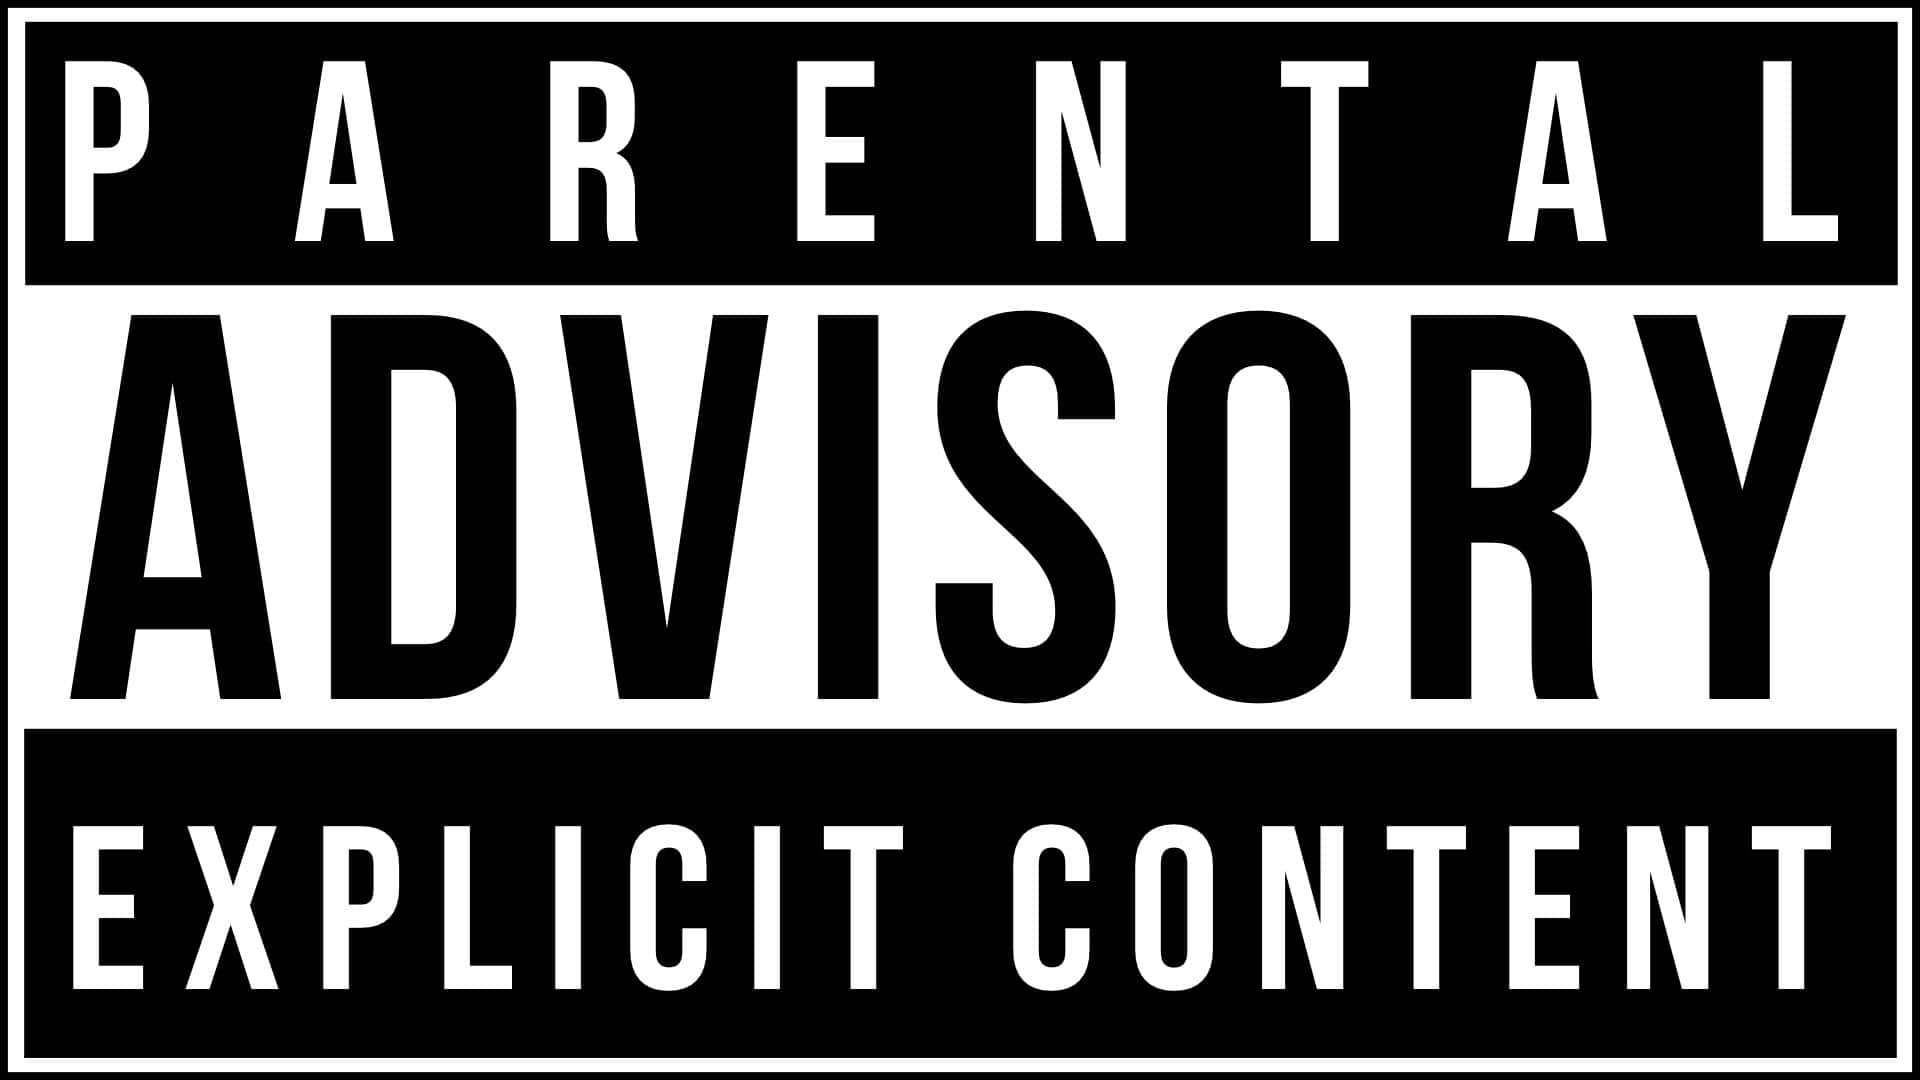 The Parental Advisory Logo With The Words Explicit Content Wallpaper